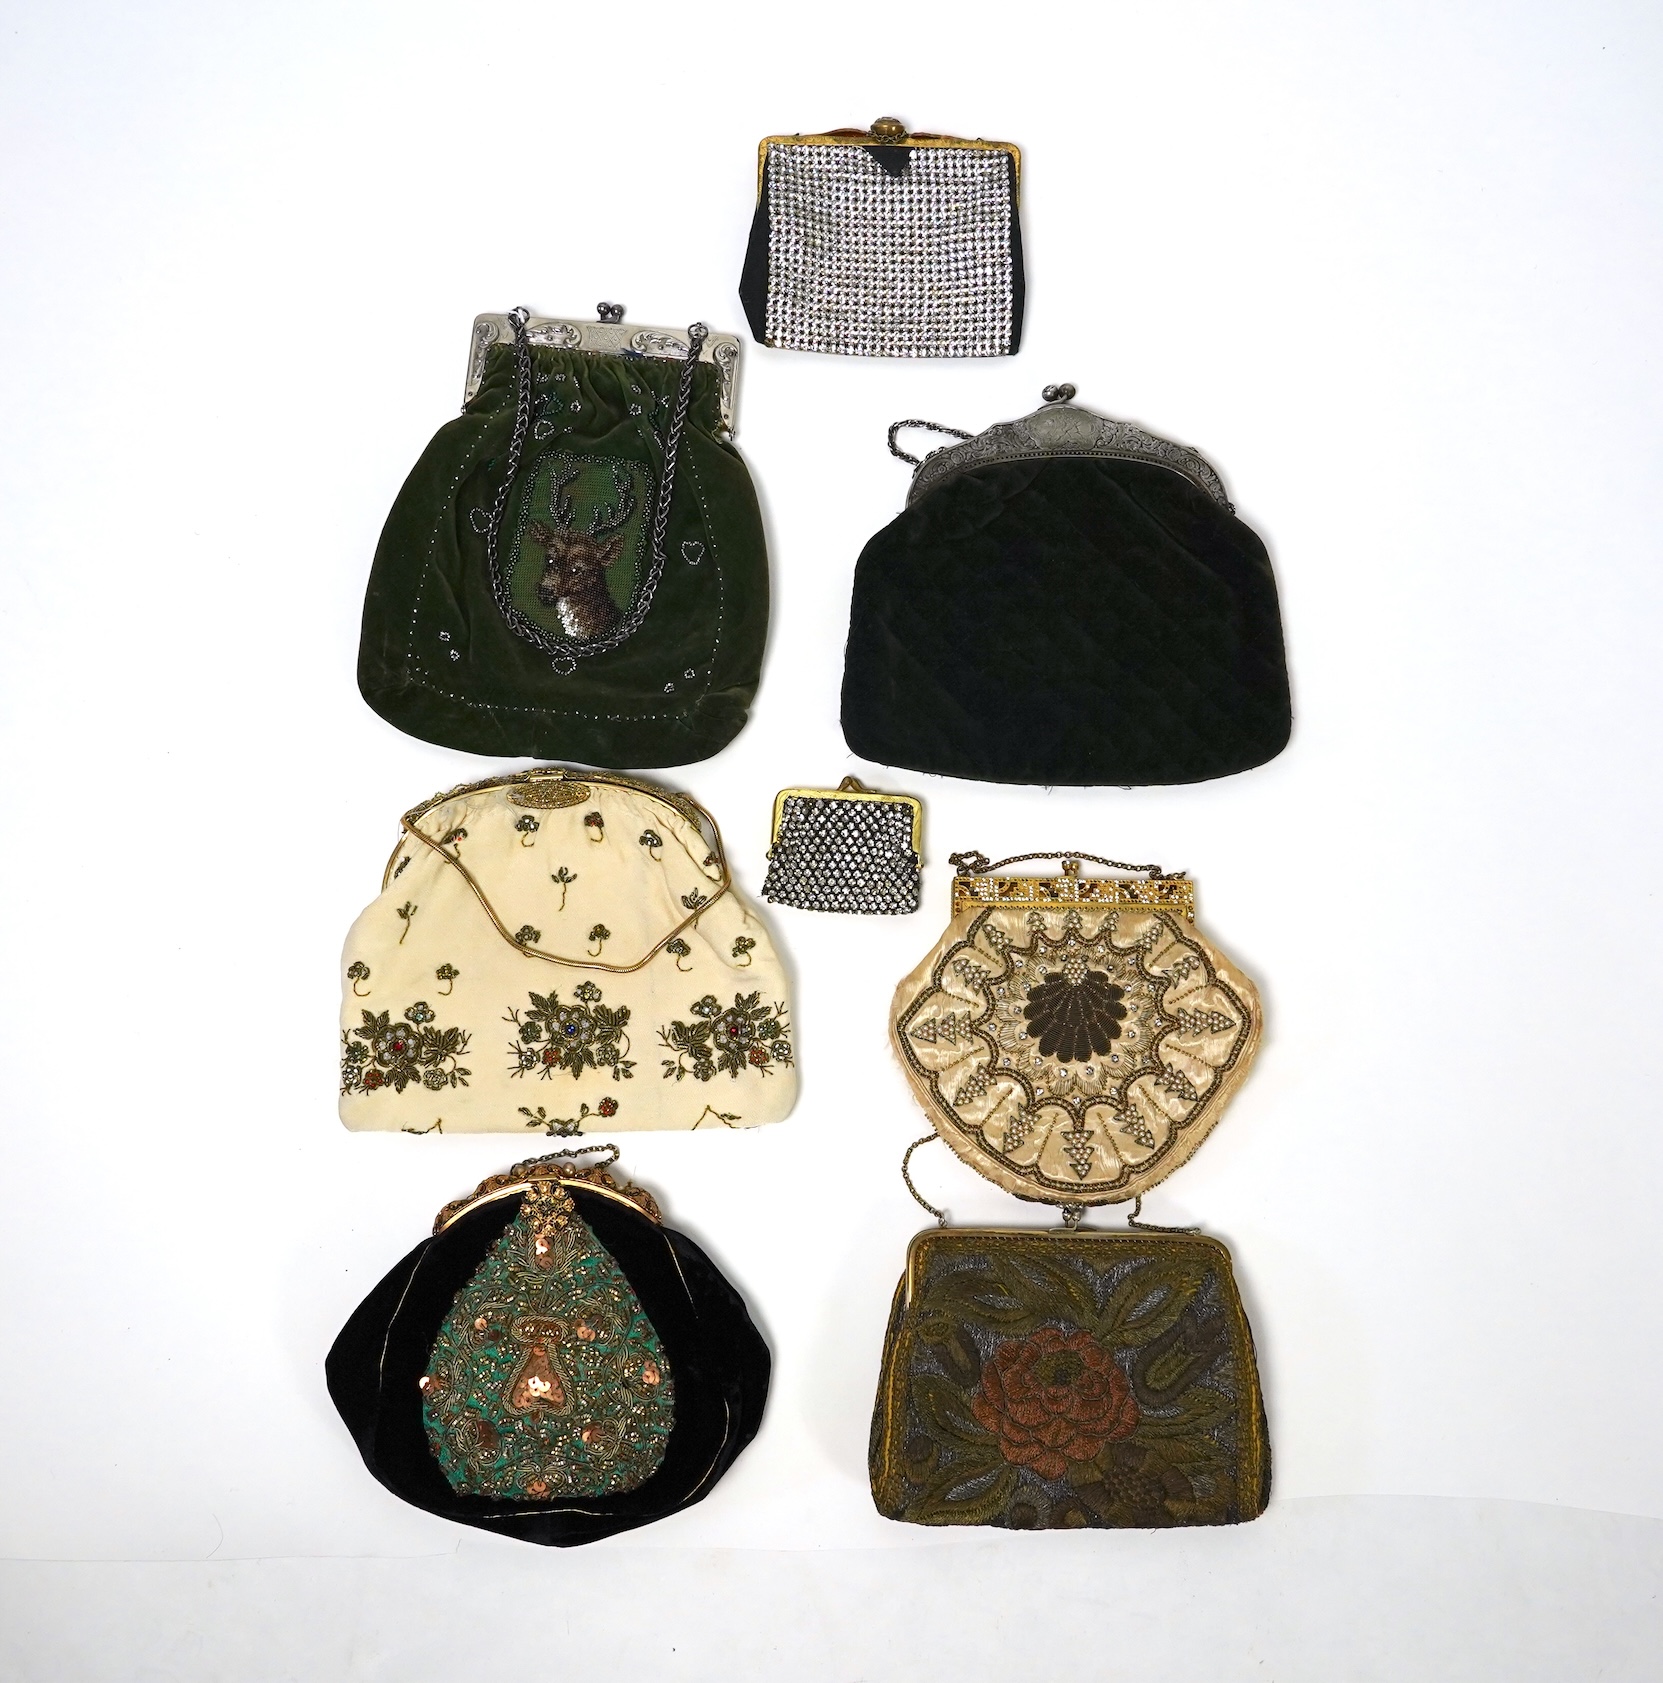 Mixed evening bags; including a 19th century velvet and cut steel handbag, a similar bag, three later gold metallic embroidered evening bags, a mixed metalic evening bag and a diamonte bag and purse (8)                  